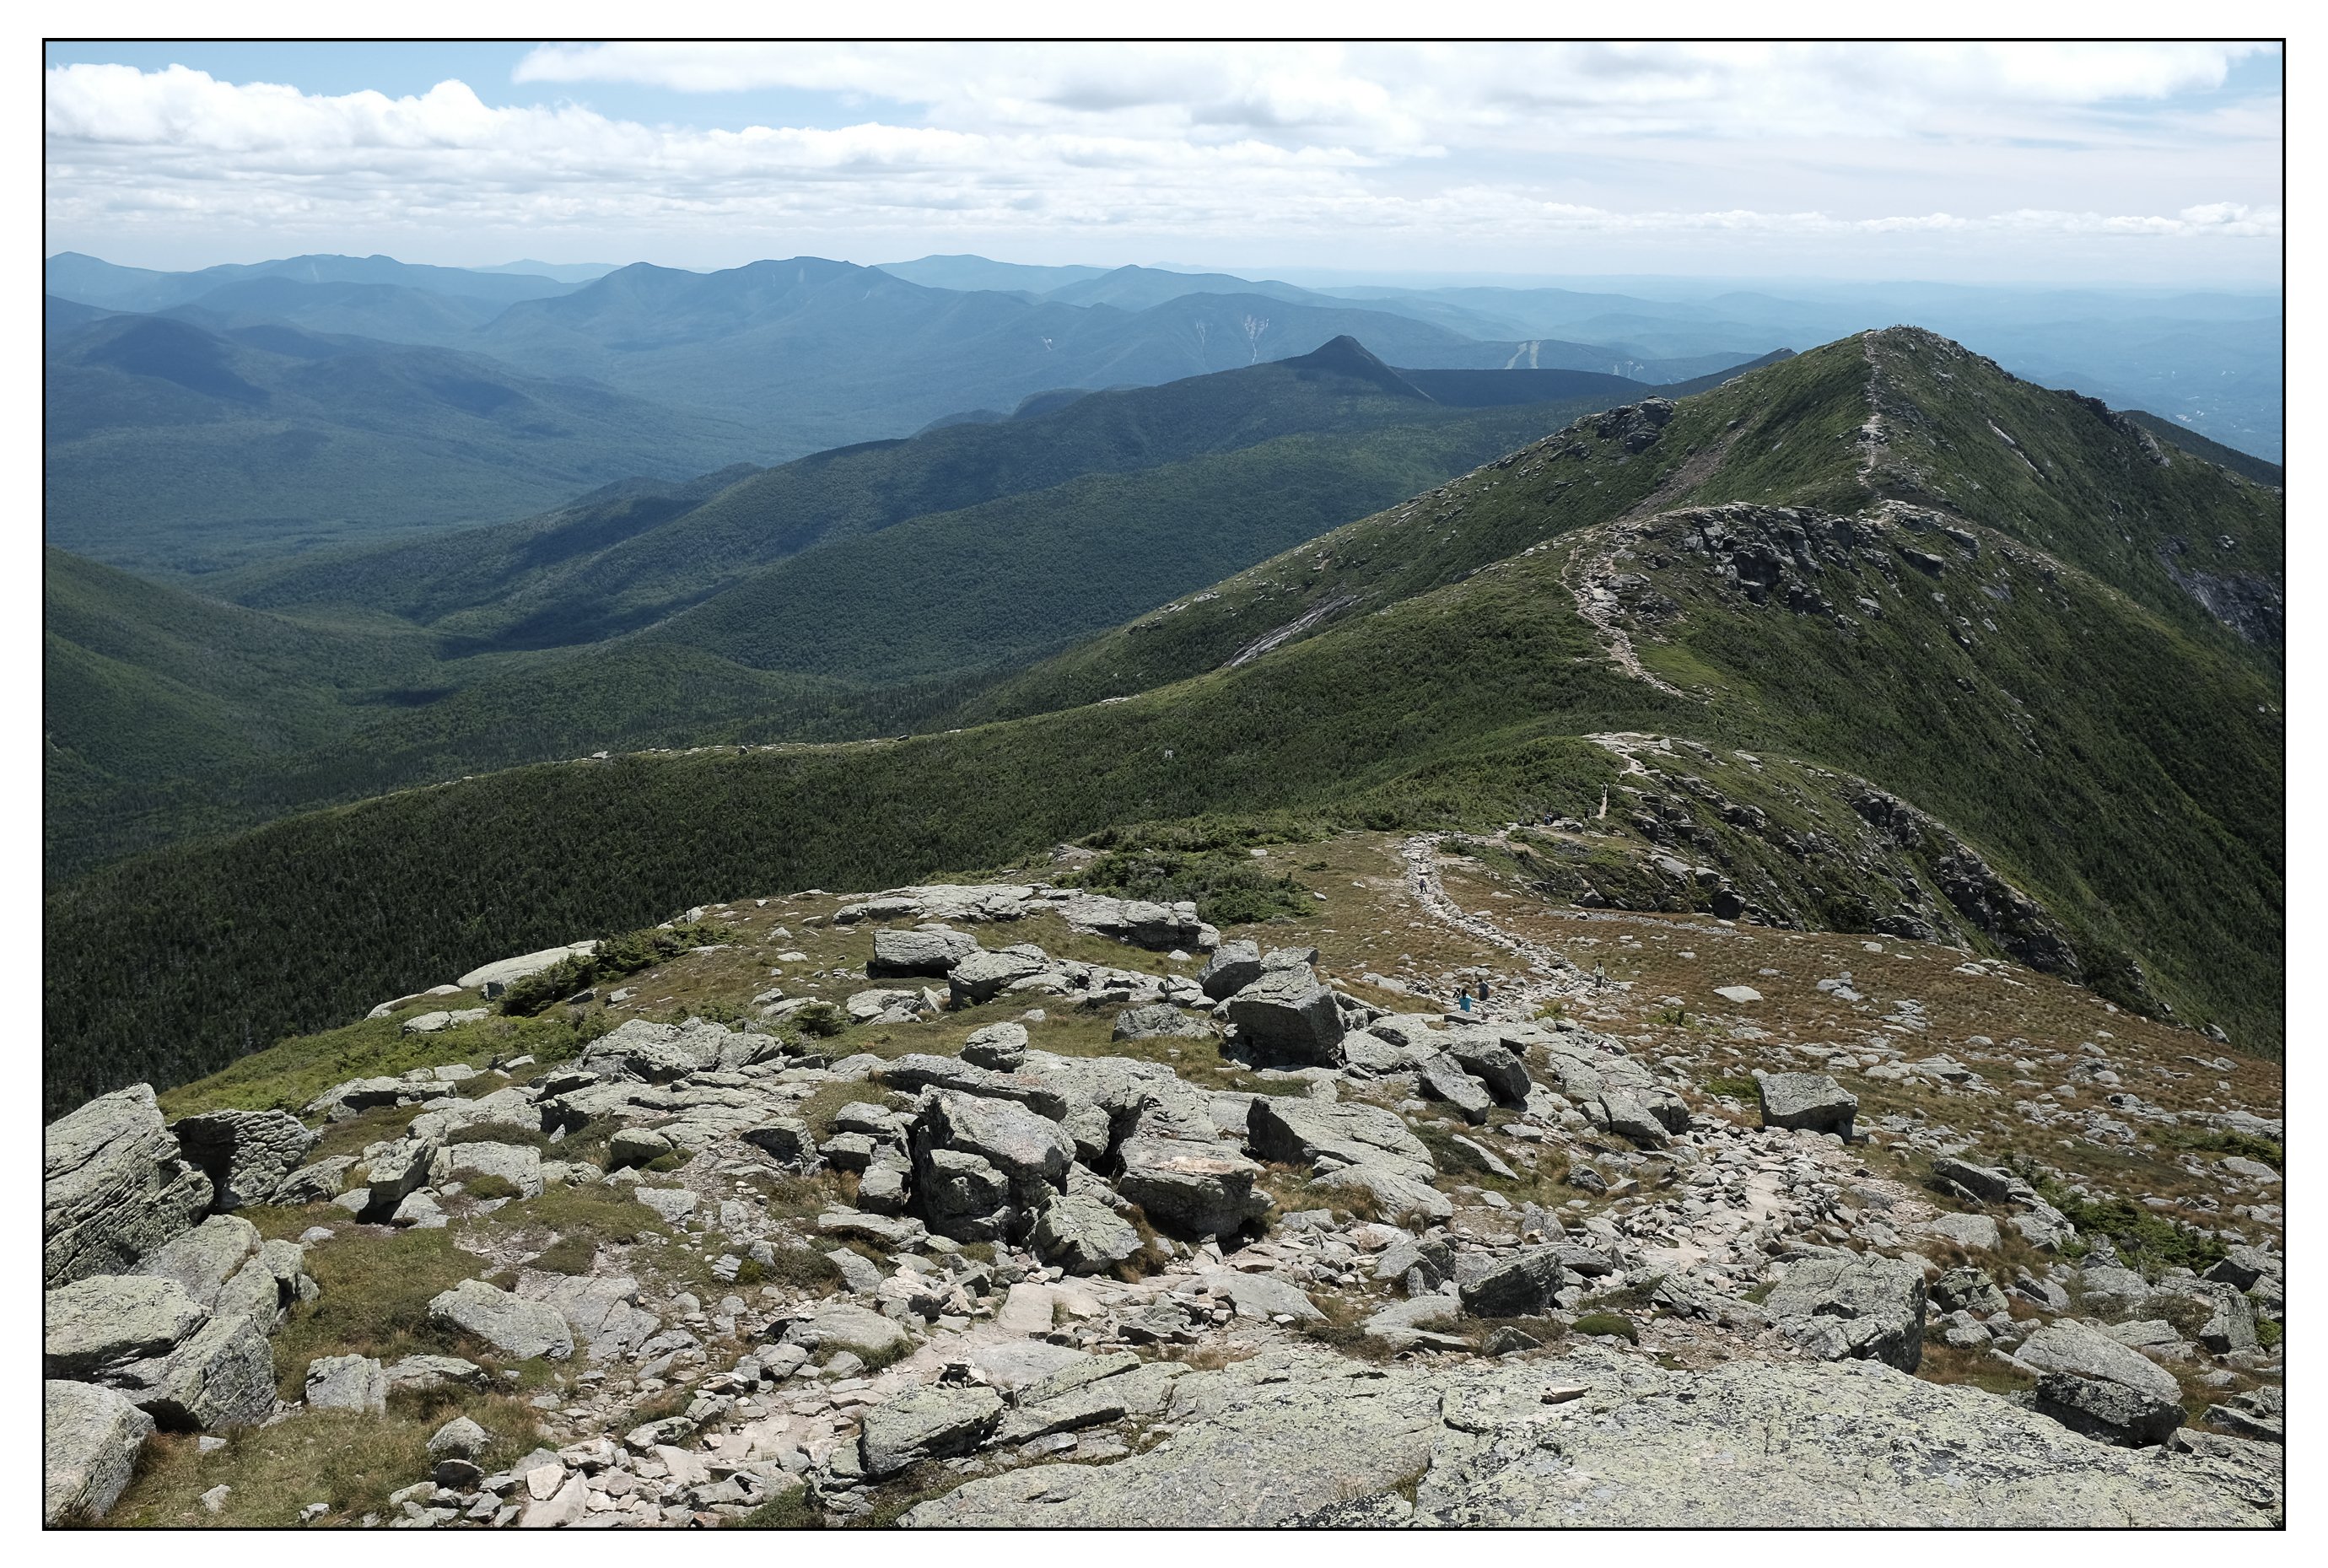 The view looking south along the Franconia Ridge from the summit of Mt. Lafayette. 